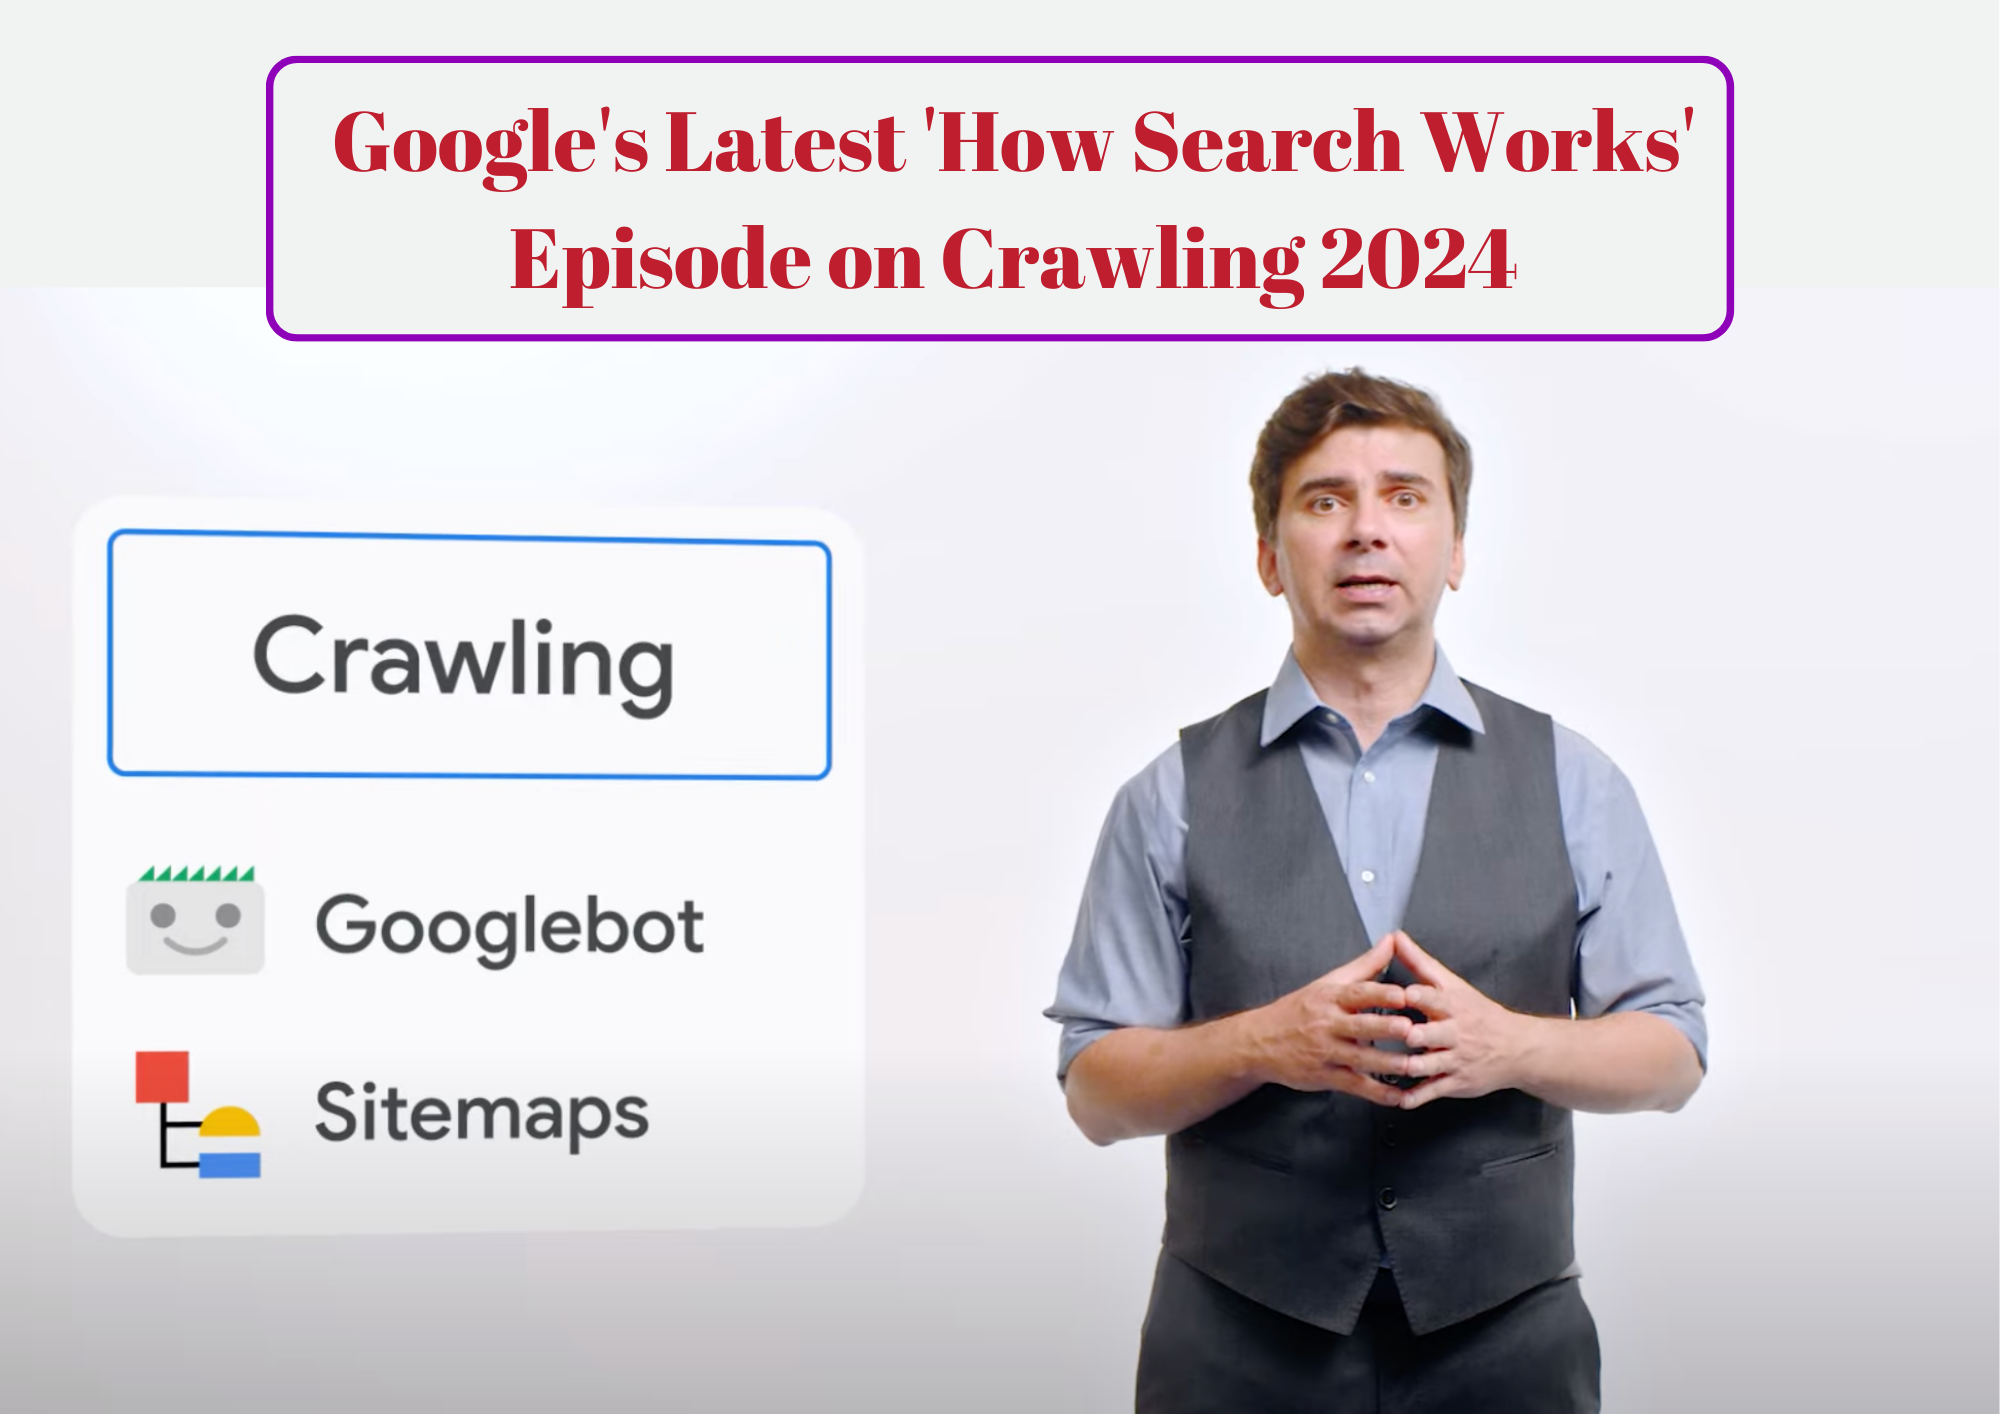 Google's Latest 'How Search Works' Episode on Crawling 2024